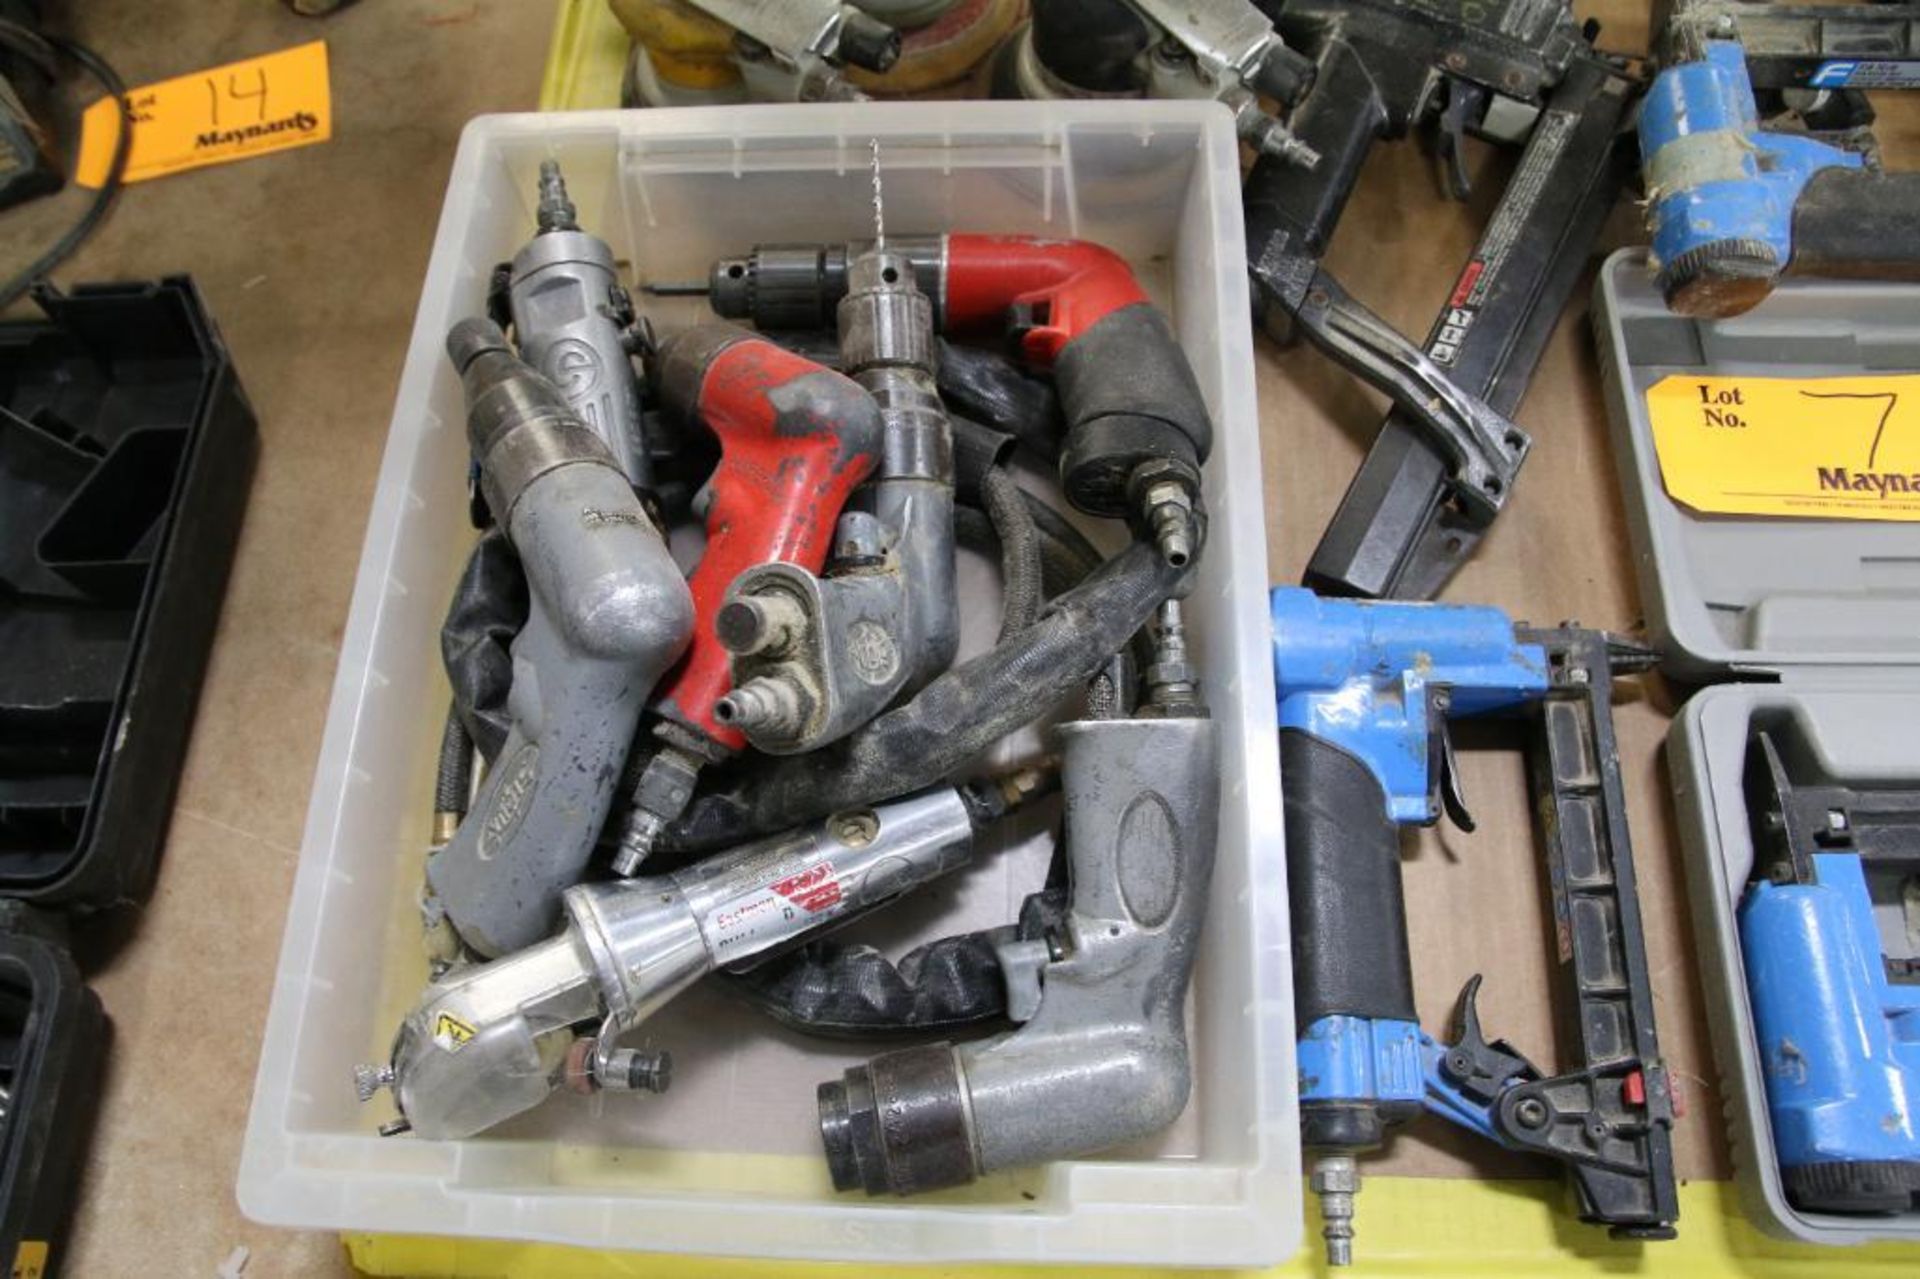 LOT: Air-Powered Hand Tools Including Orbital Sanders, Drills, Staple and Nail Guns - Image 2 of 4